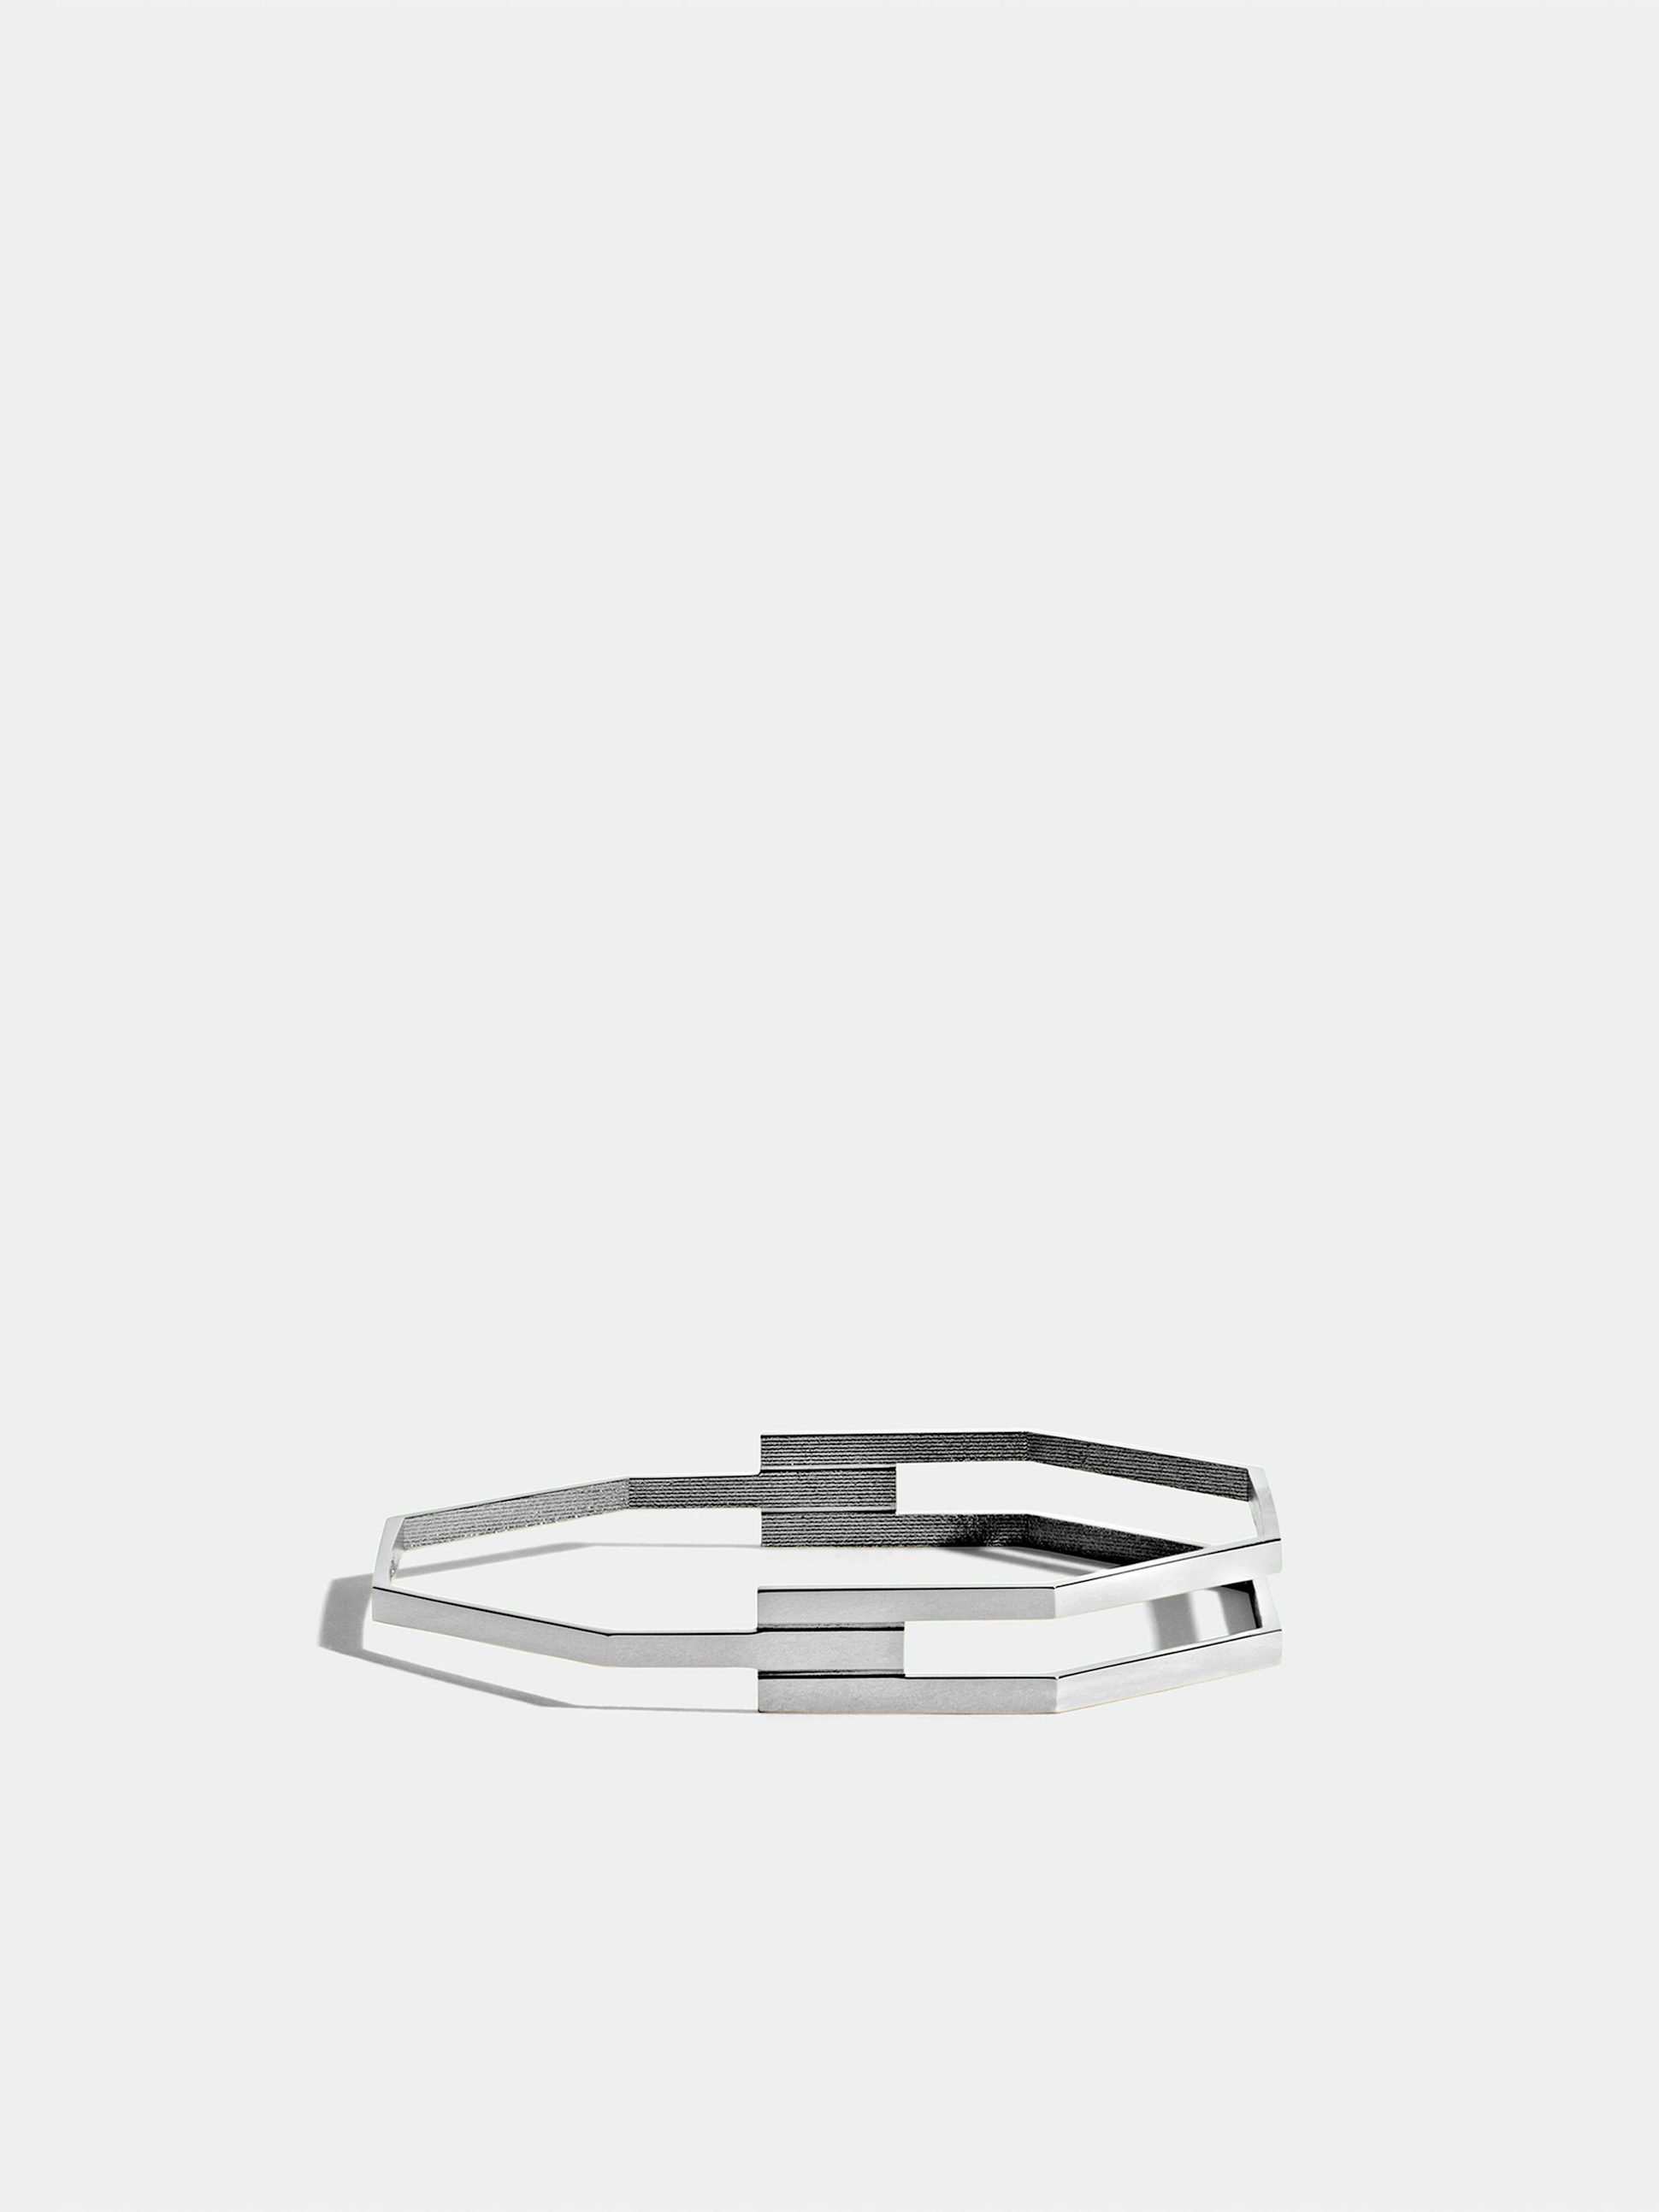 Octogone triple bangle in 18k Fairmined ethical white gold